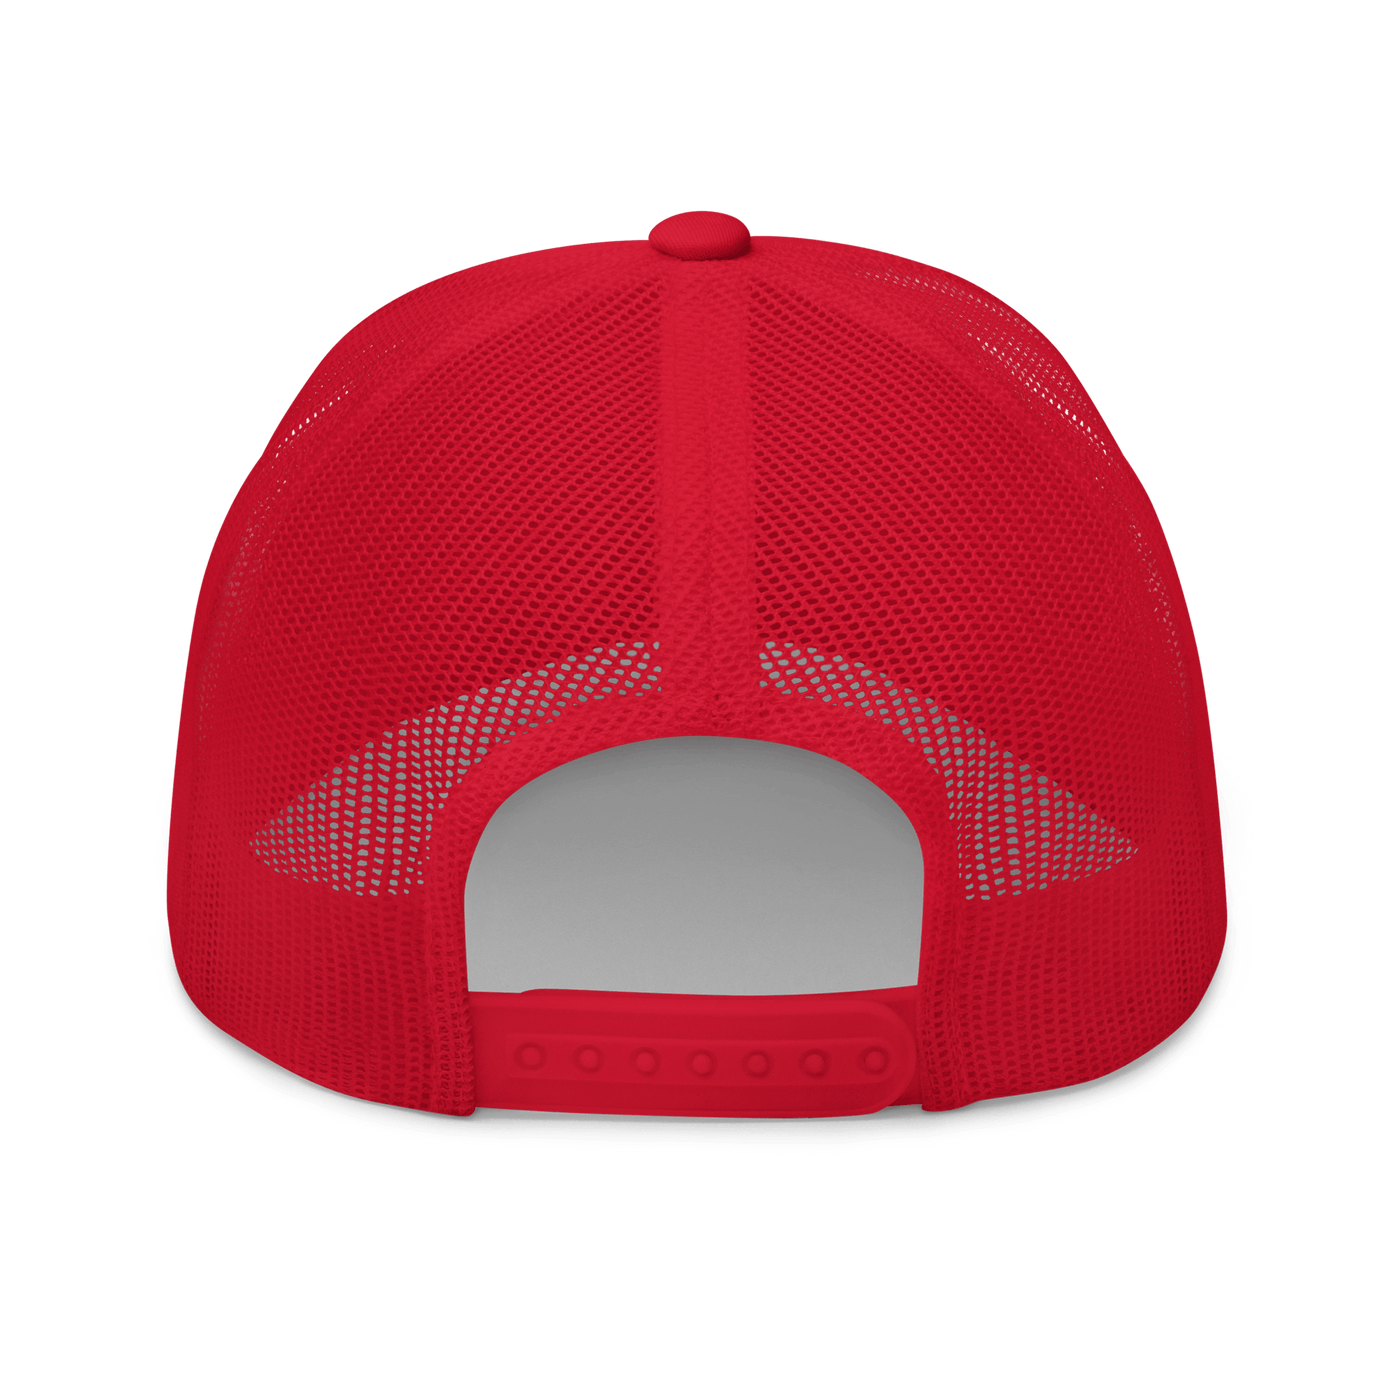 Fries Before Guys Trucker Cap - Red - - Just Another Cap Store